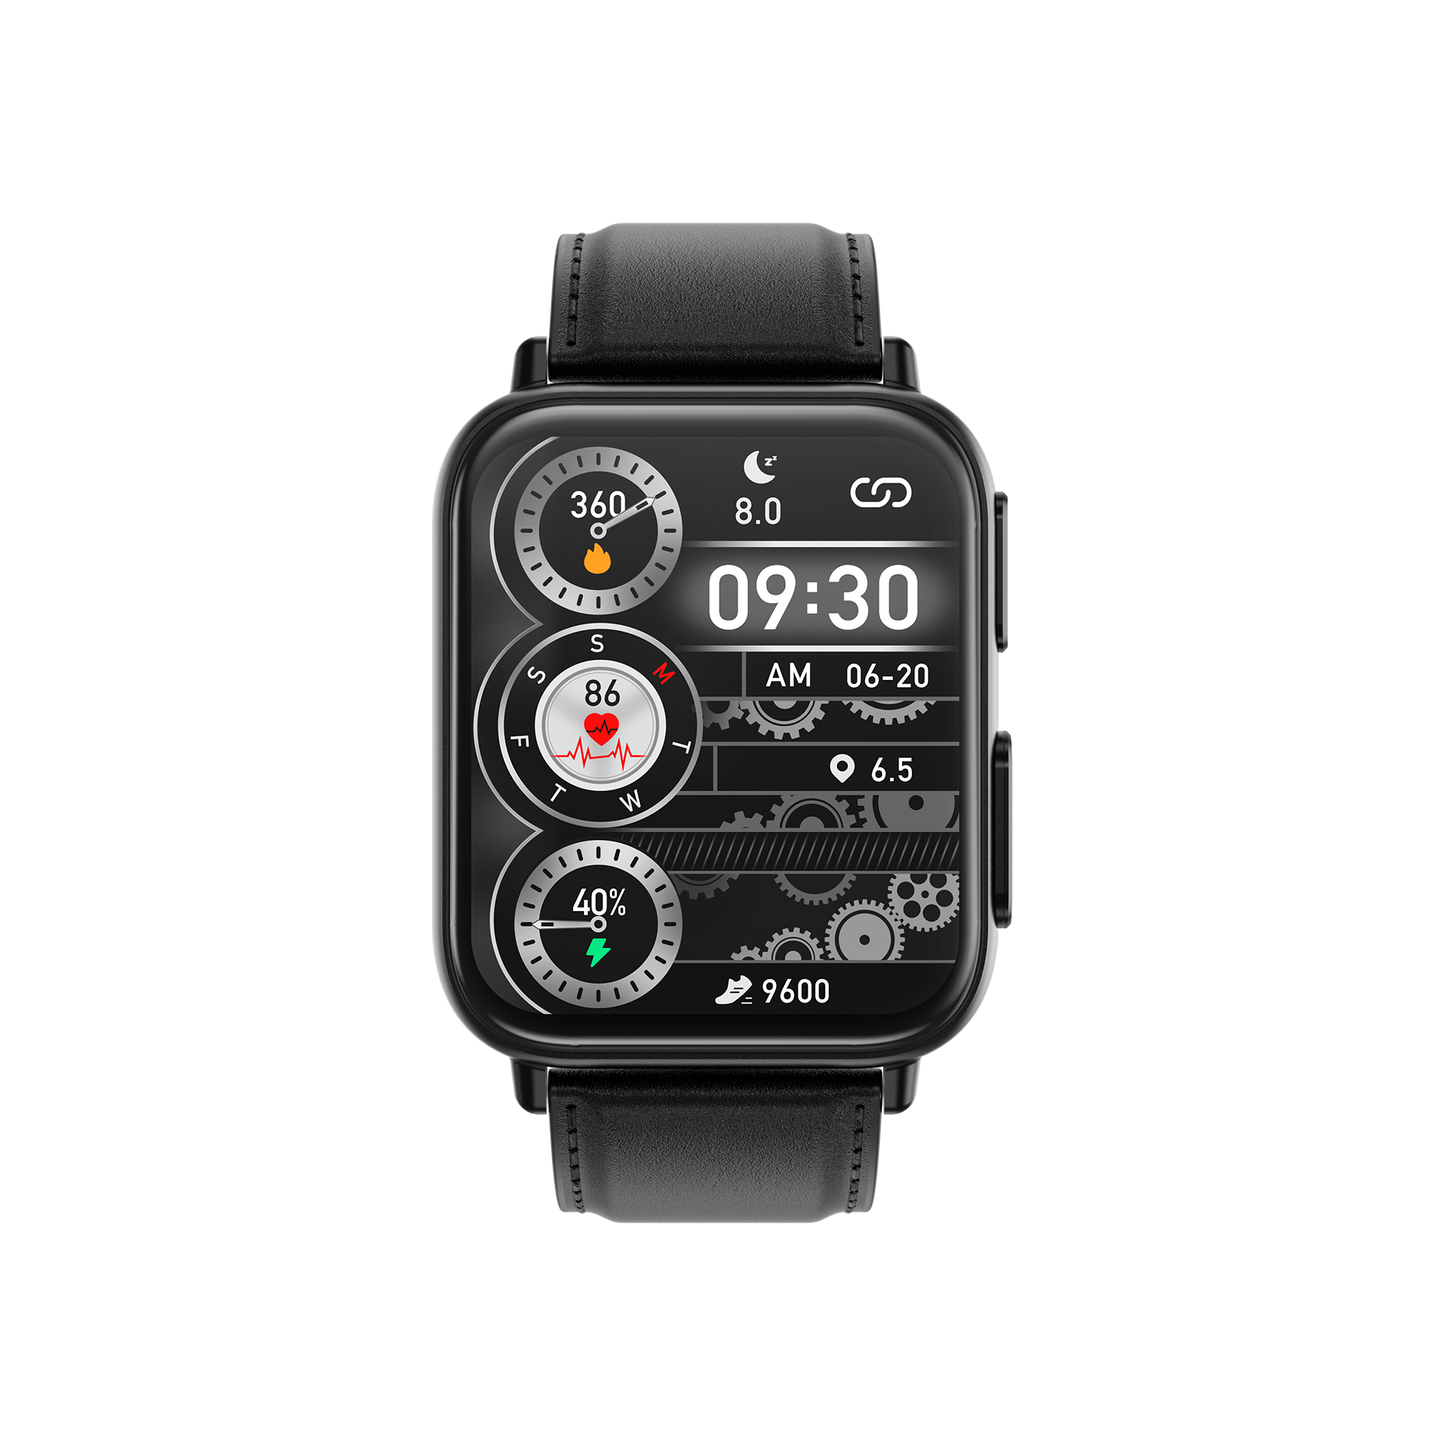 GT5 Pro New Advanced Health Monitoring Smartwatch with Blood Sugar + Blood Pressure + ECG + Sleep Tracking